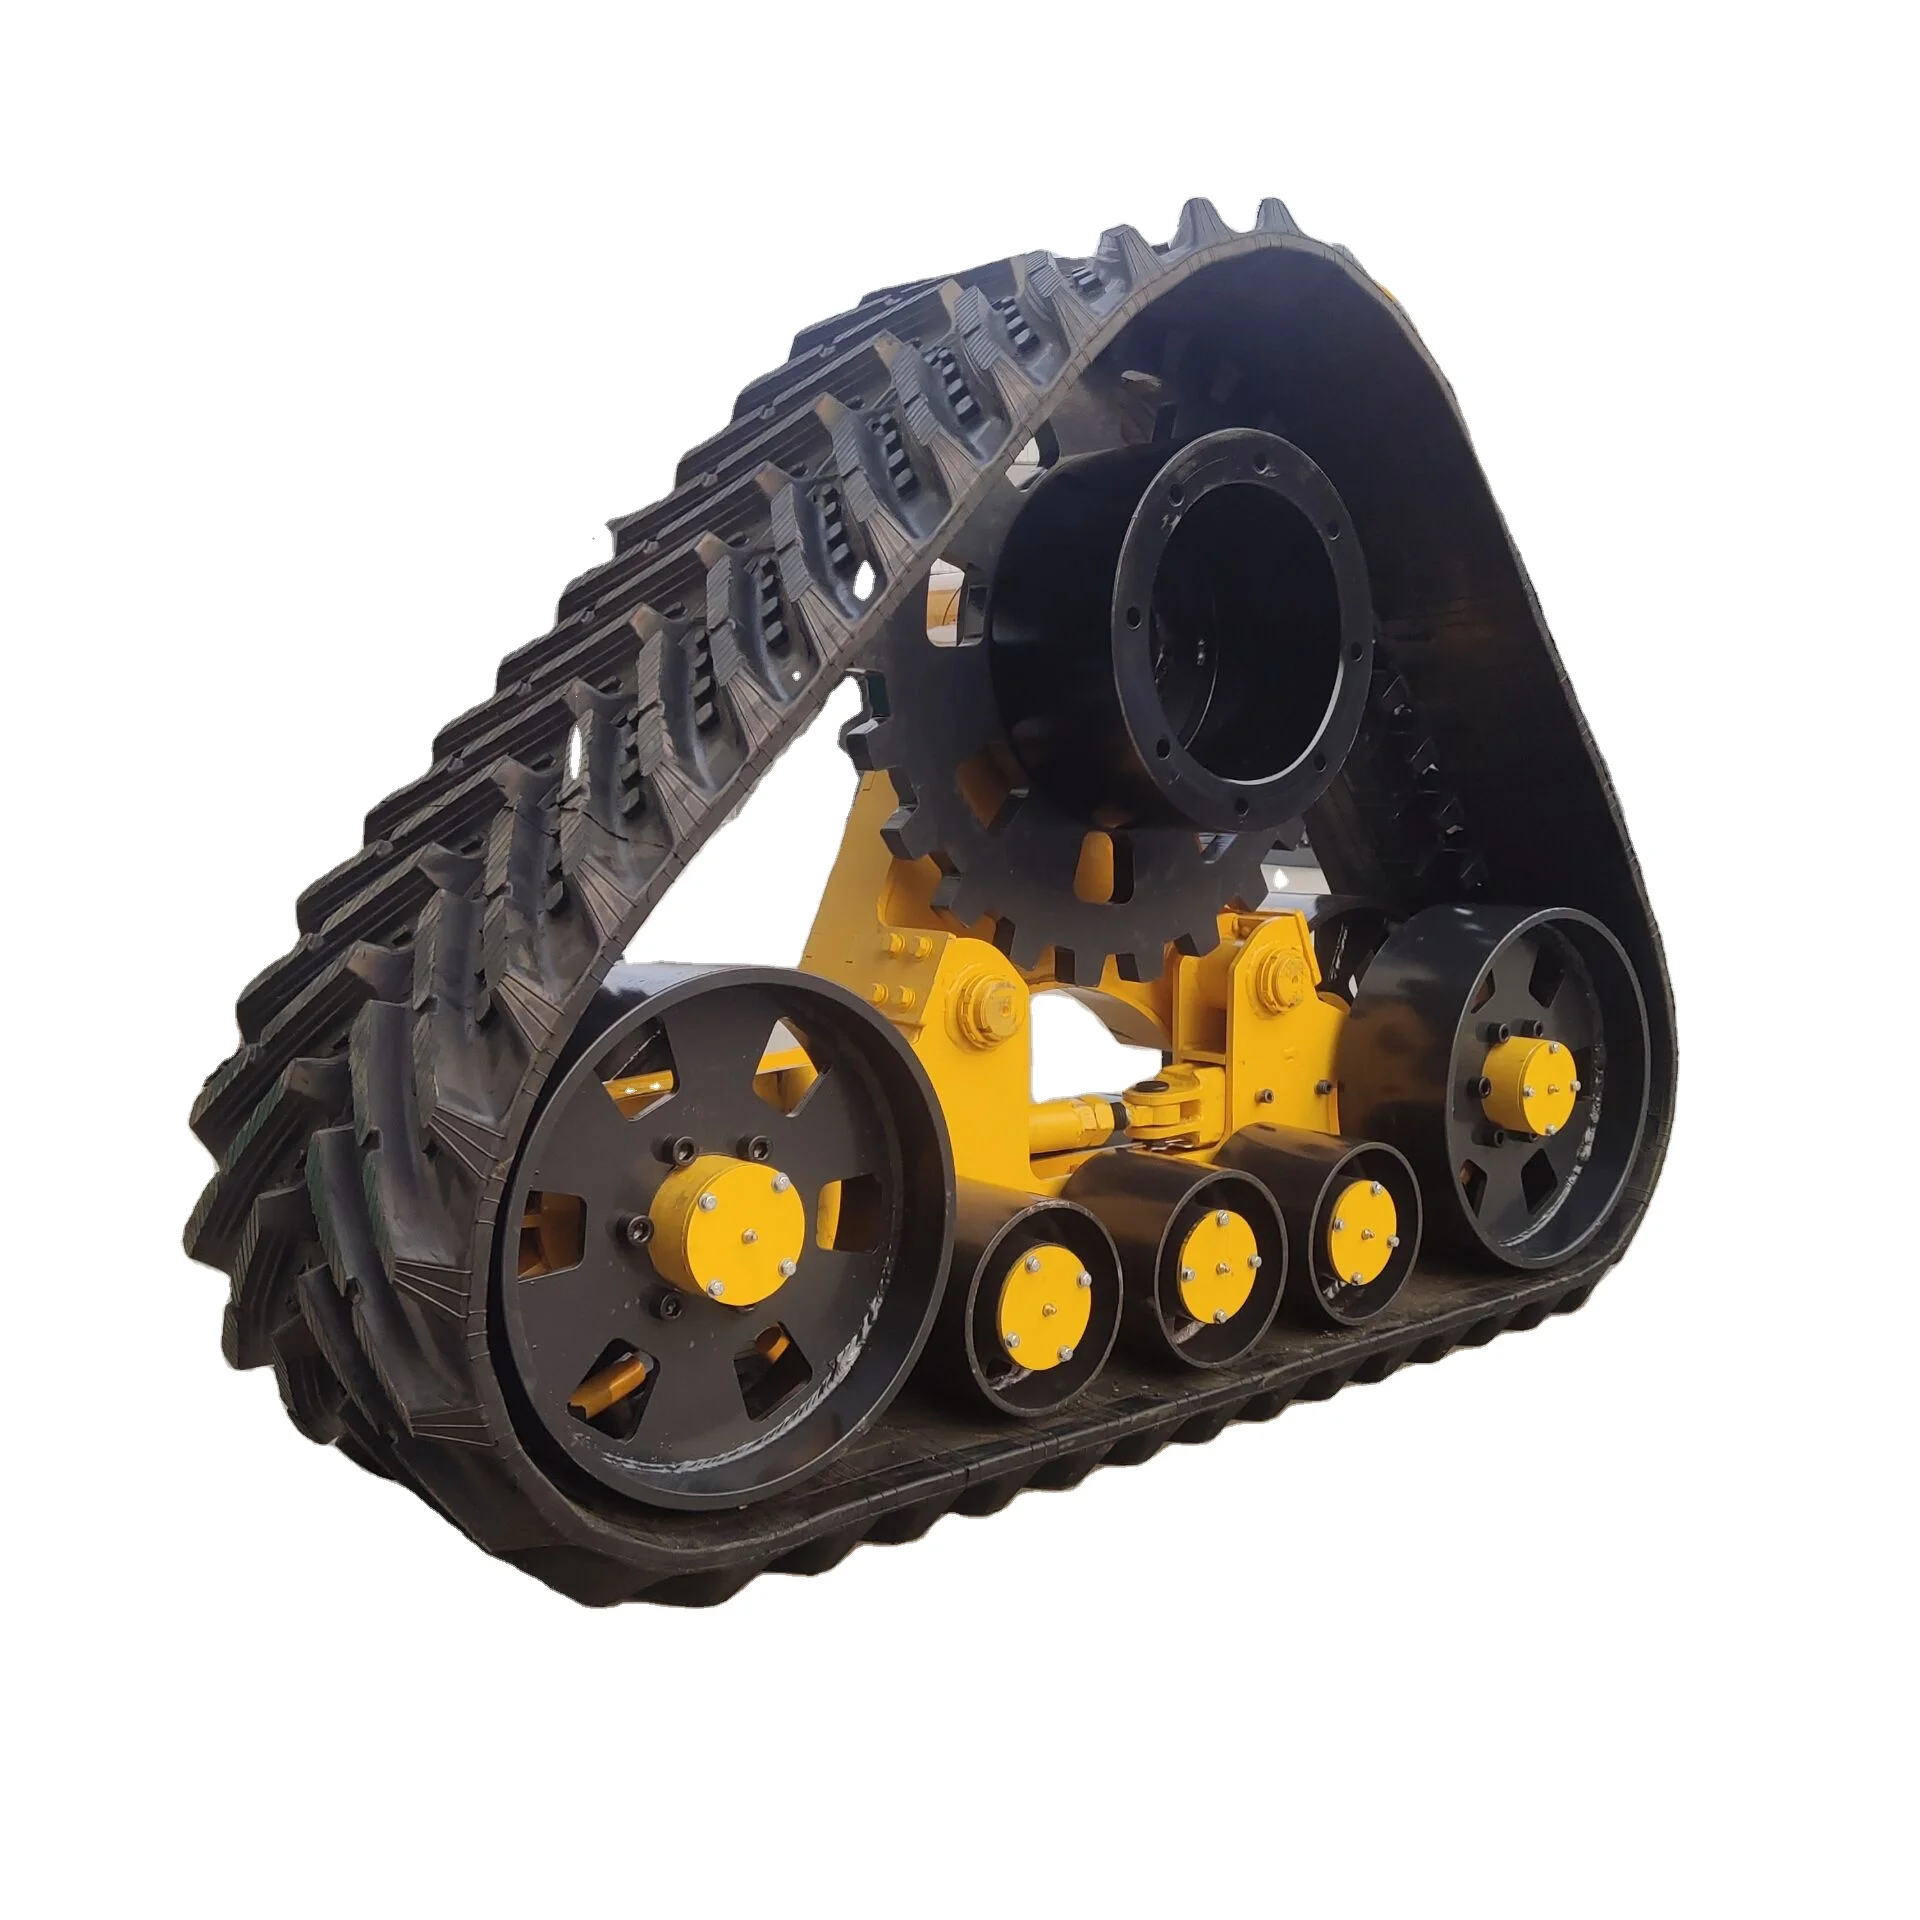 

Crawler Rubber track system for combine swather agricultural farm equipment work use tracked chassis undercarriage